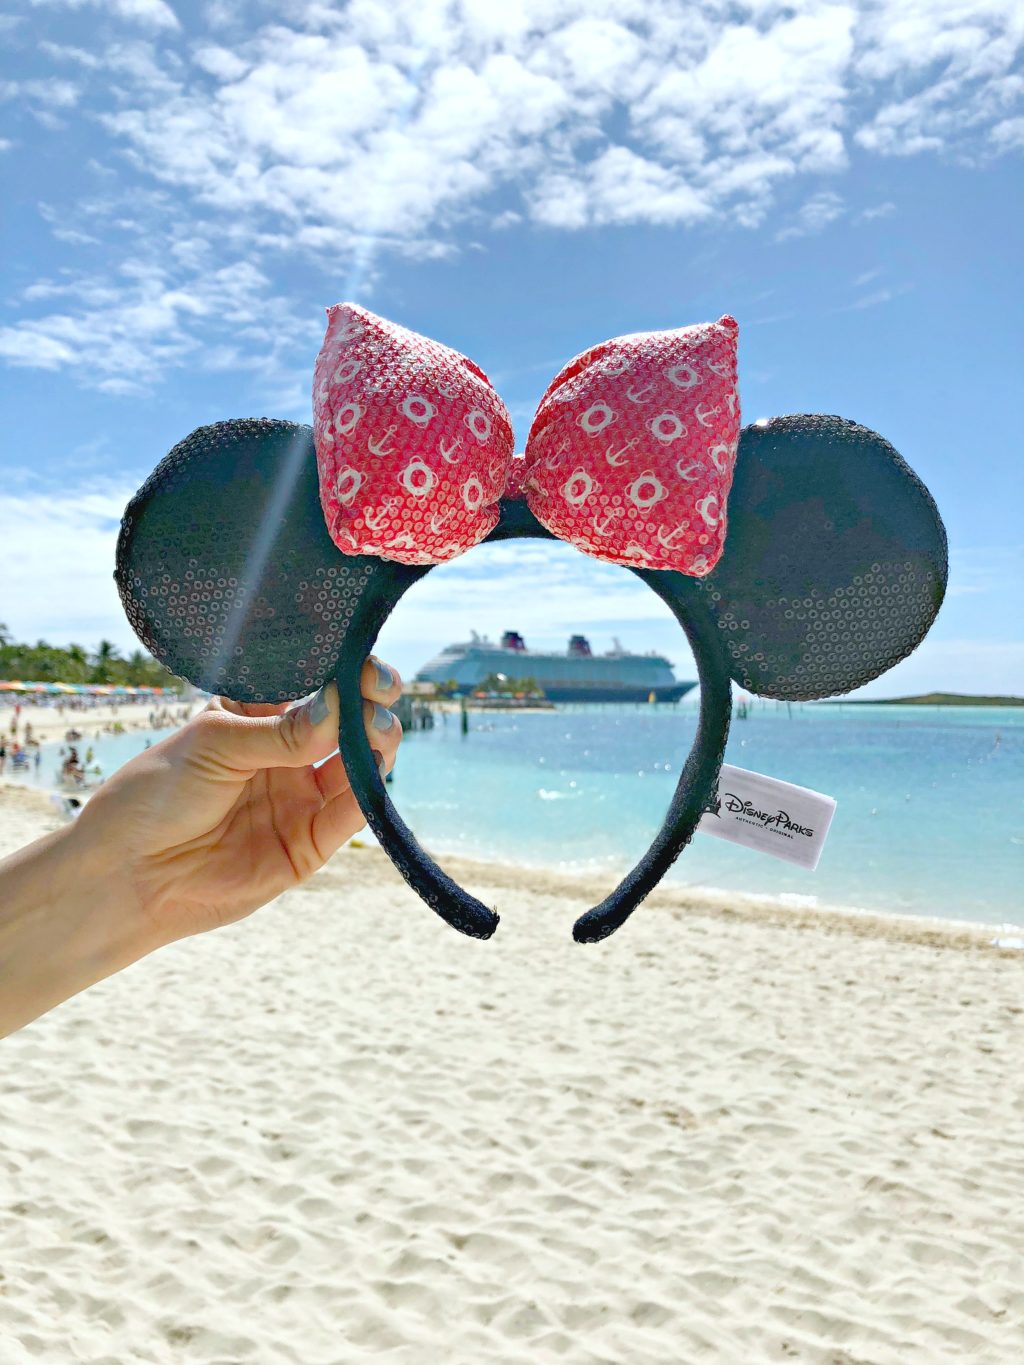 Things to Do at Disney’s Castaway Cay for Adults! #DisneySMMC